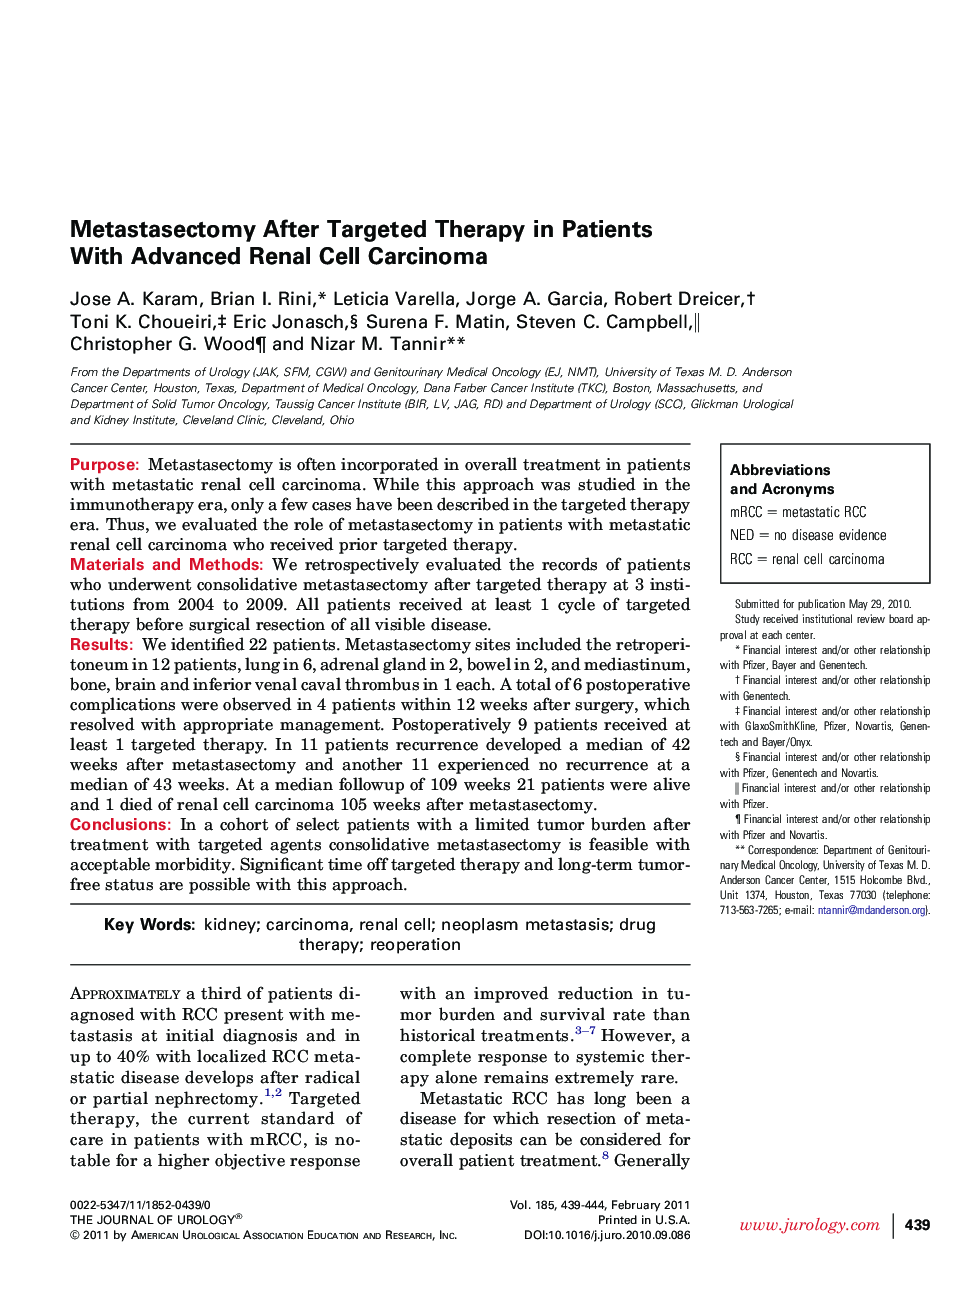 Metastasectomy After Targeted Therapy in Patients With Advanced Renal Cell Carcinoma 